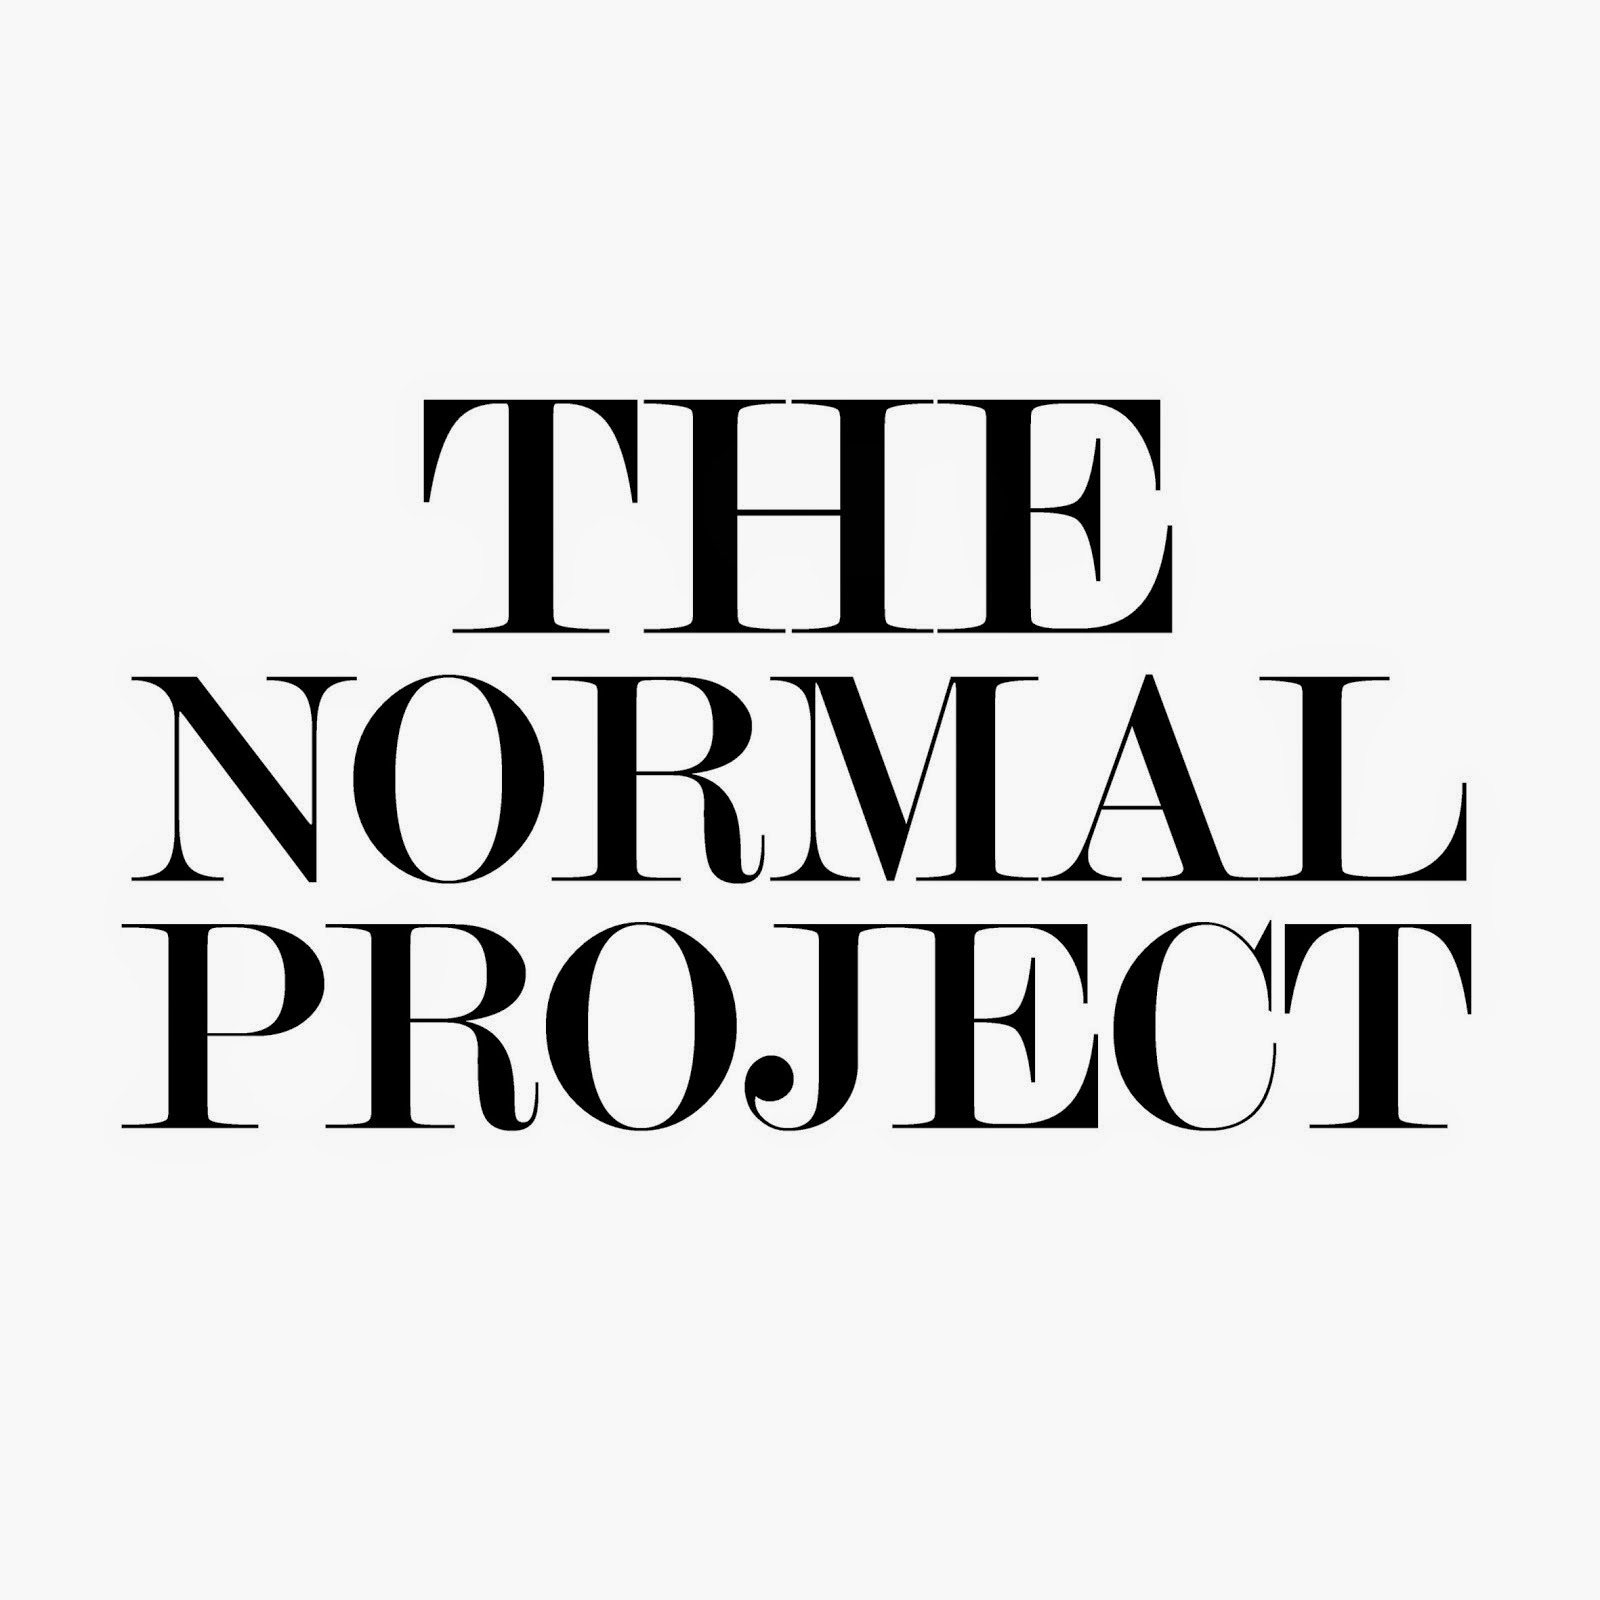 THE NORMAL PROJECT_